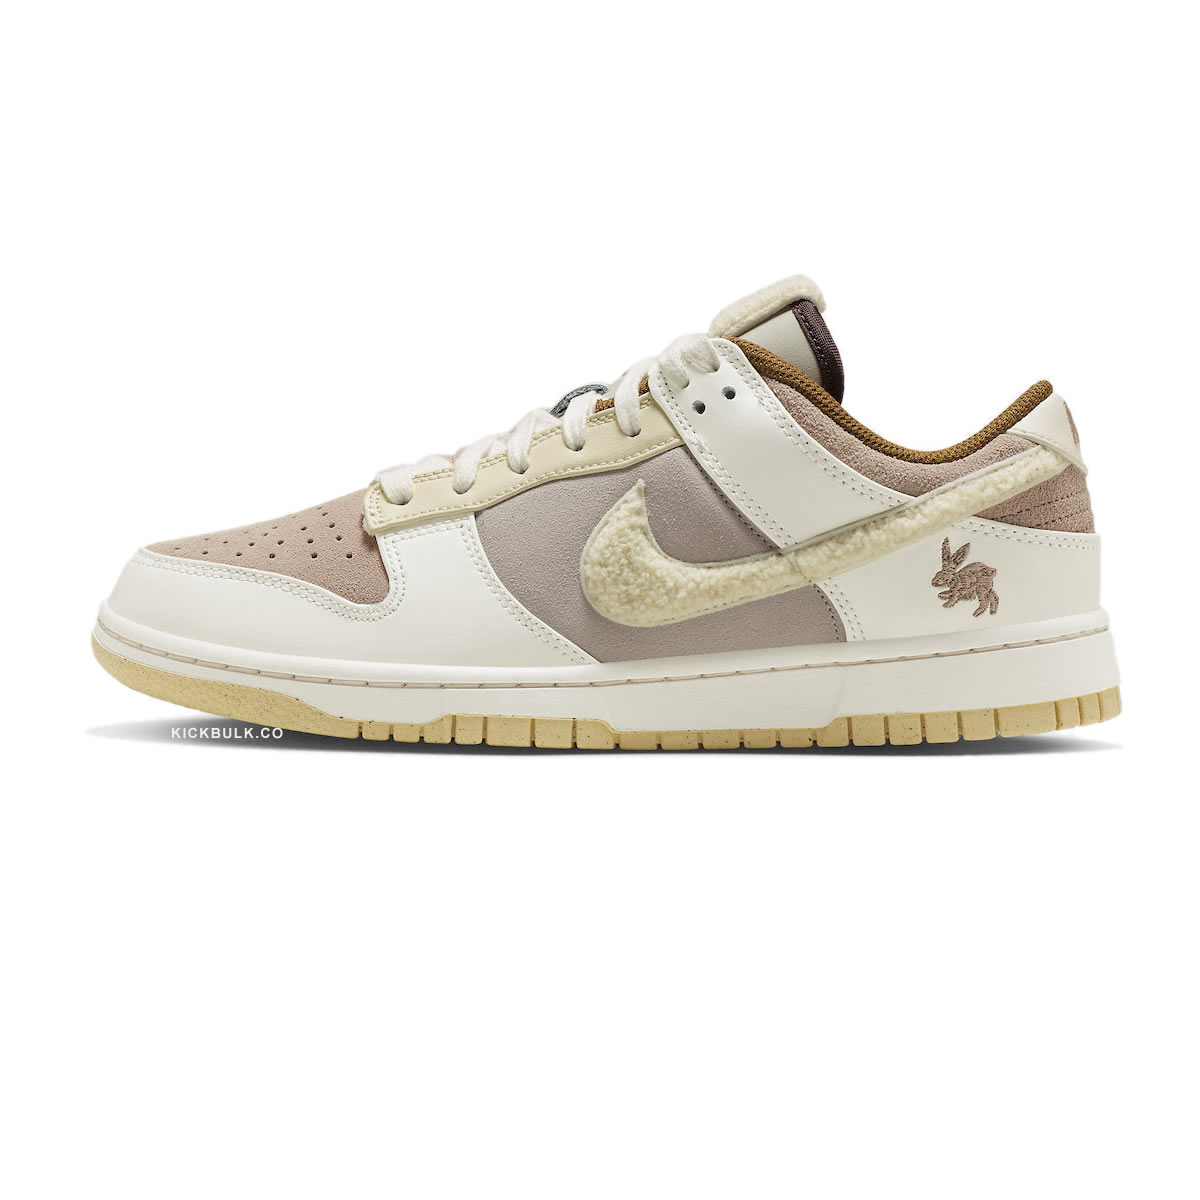 Nike Dunk Low Year Of The Rabbit White Taupe Fd4203 211 1 - kickbulk.co